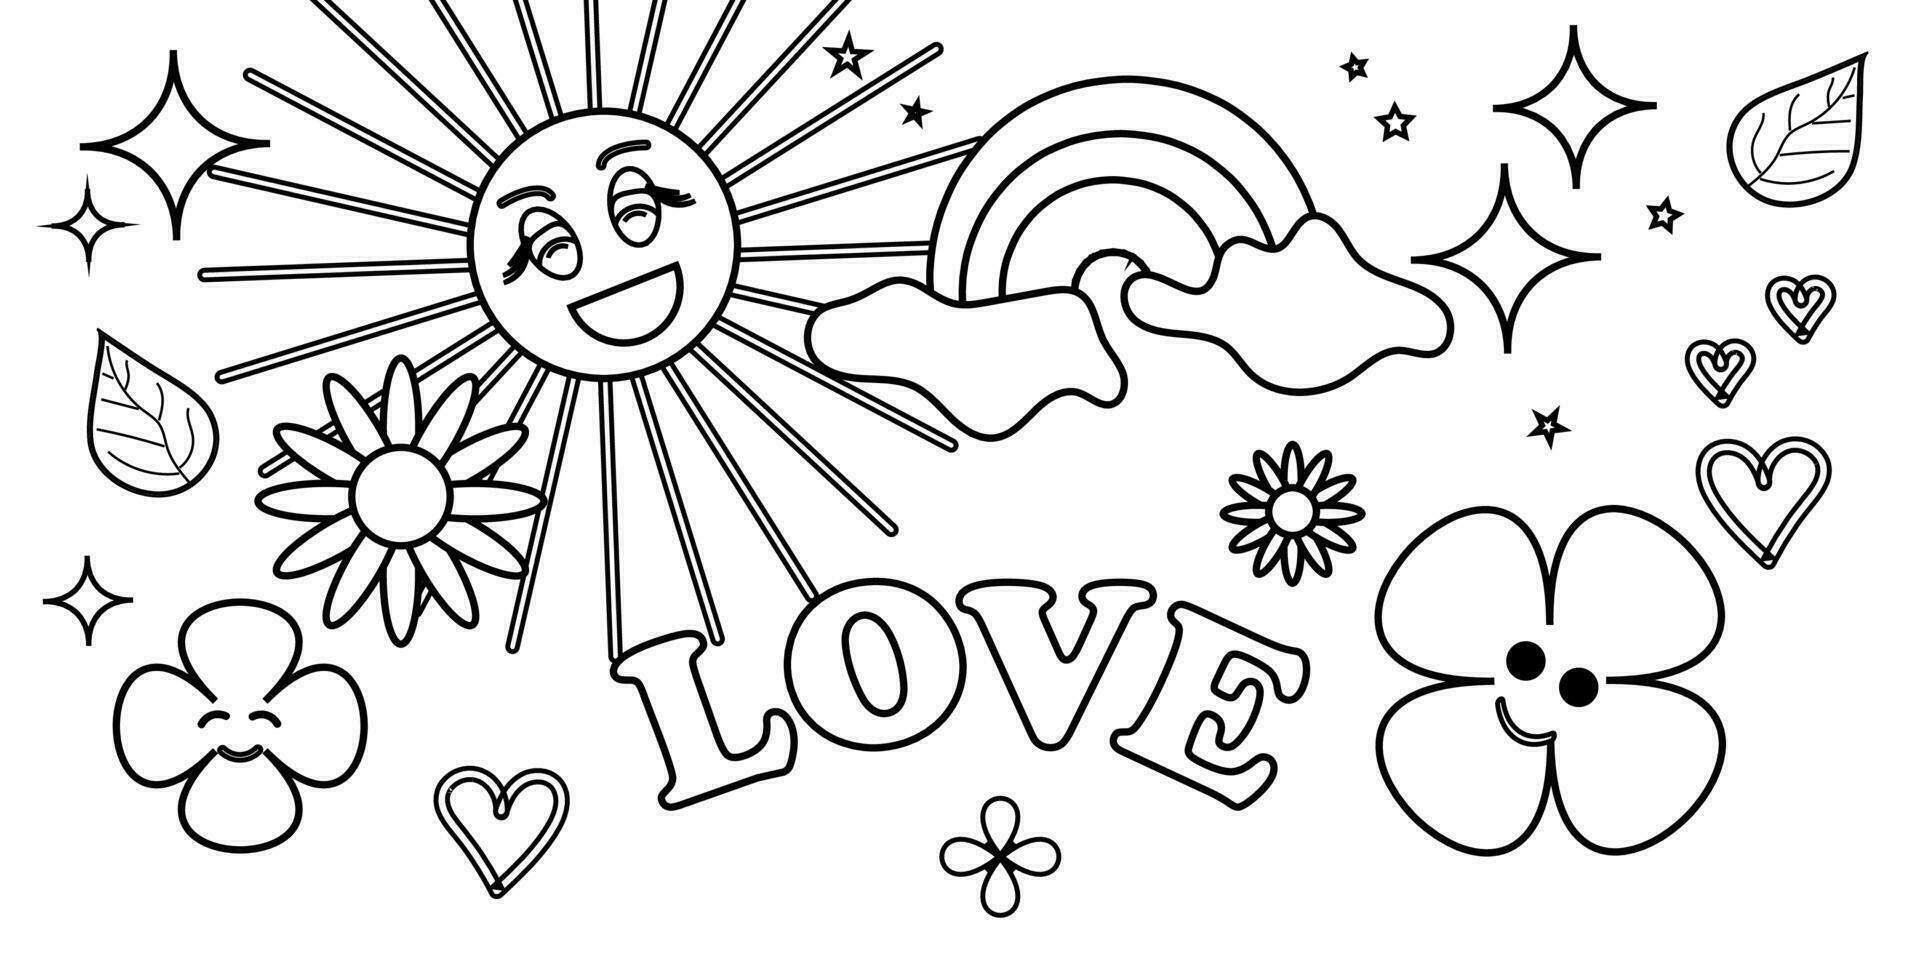 A groovy hippie of the 70s. Funny cartoon flower, rainbow, love, heart, chamomile. Sticker pack in a fashionable retro-psychedelic cartoon style. Stand-alone vector illustration.